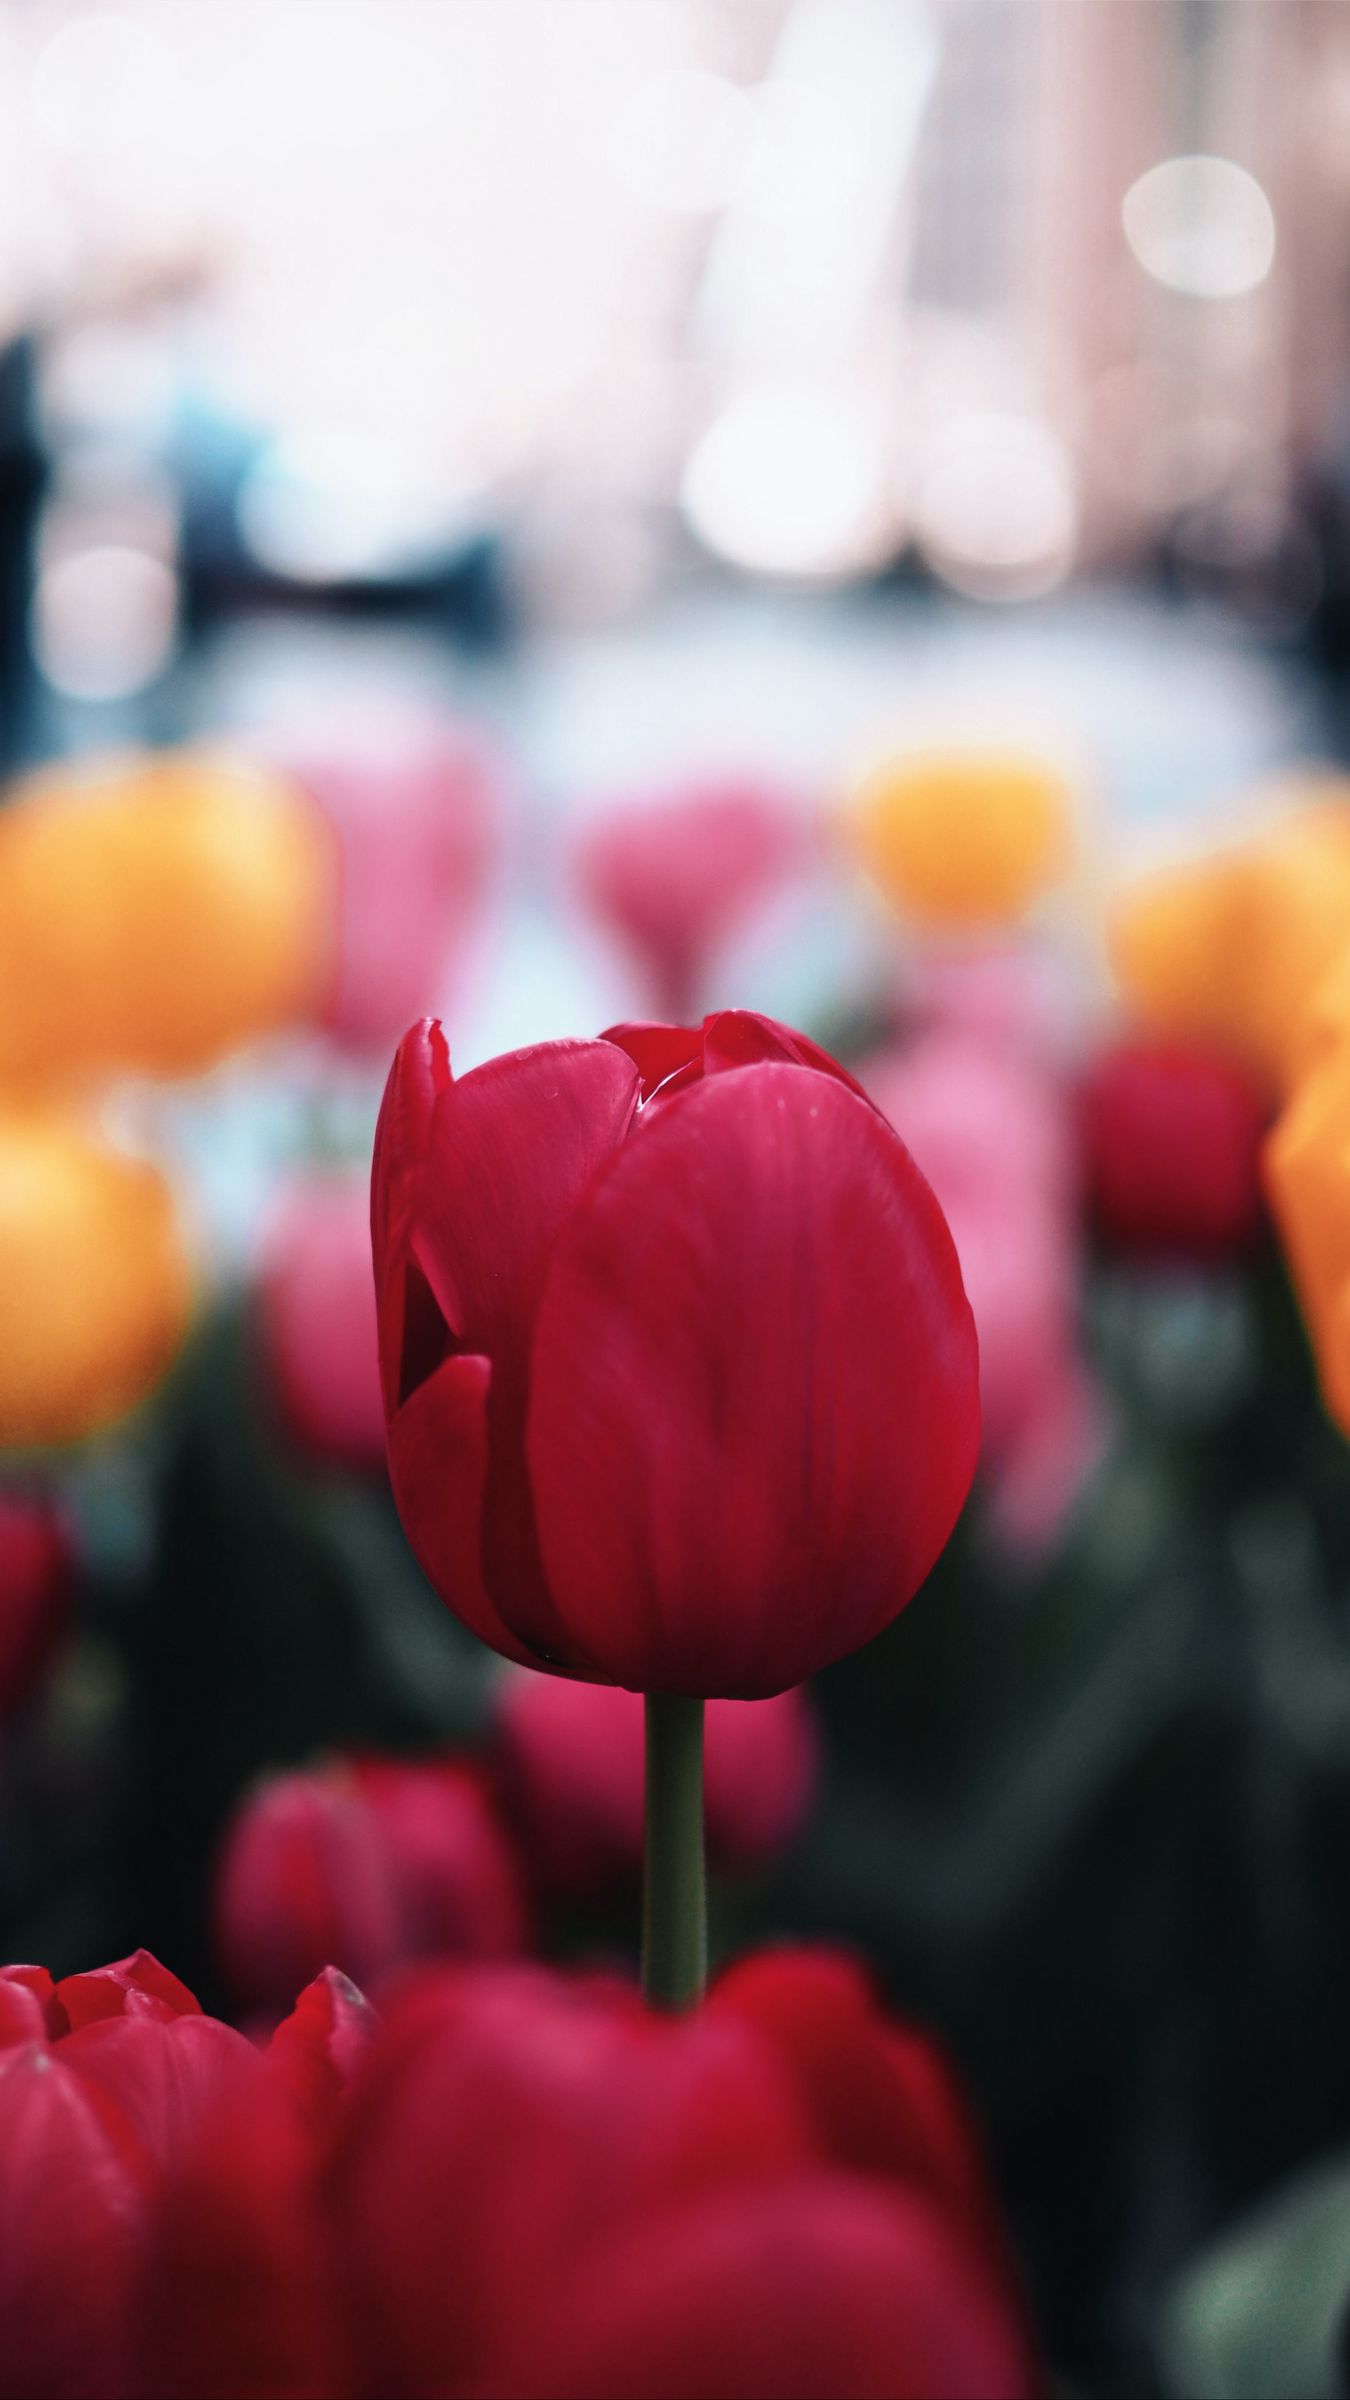 Download wallpaper 1350x2400 tulip flower red macro bloom plant iphone  876s6 for parallax hd background